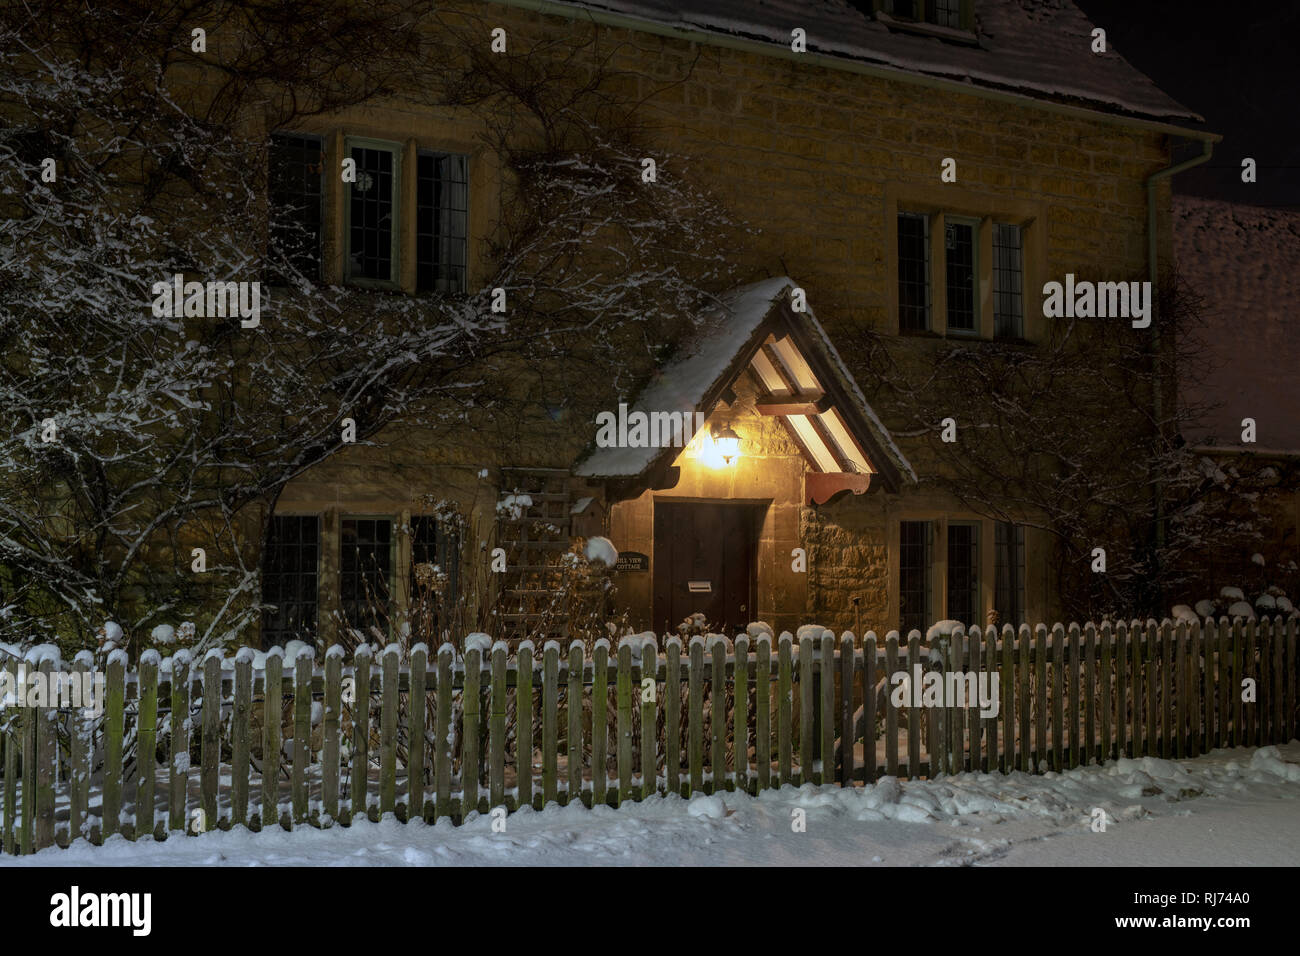 Cottage in sherborne street in Bourton on the Water in the early morning snow before dawn. Bourton on the Water, Cotswolds, Gloucestershire, England Stock Photo